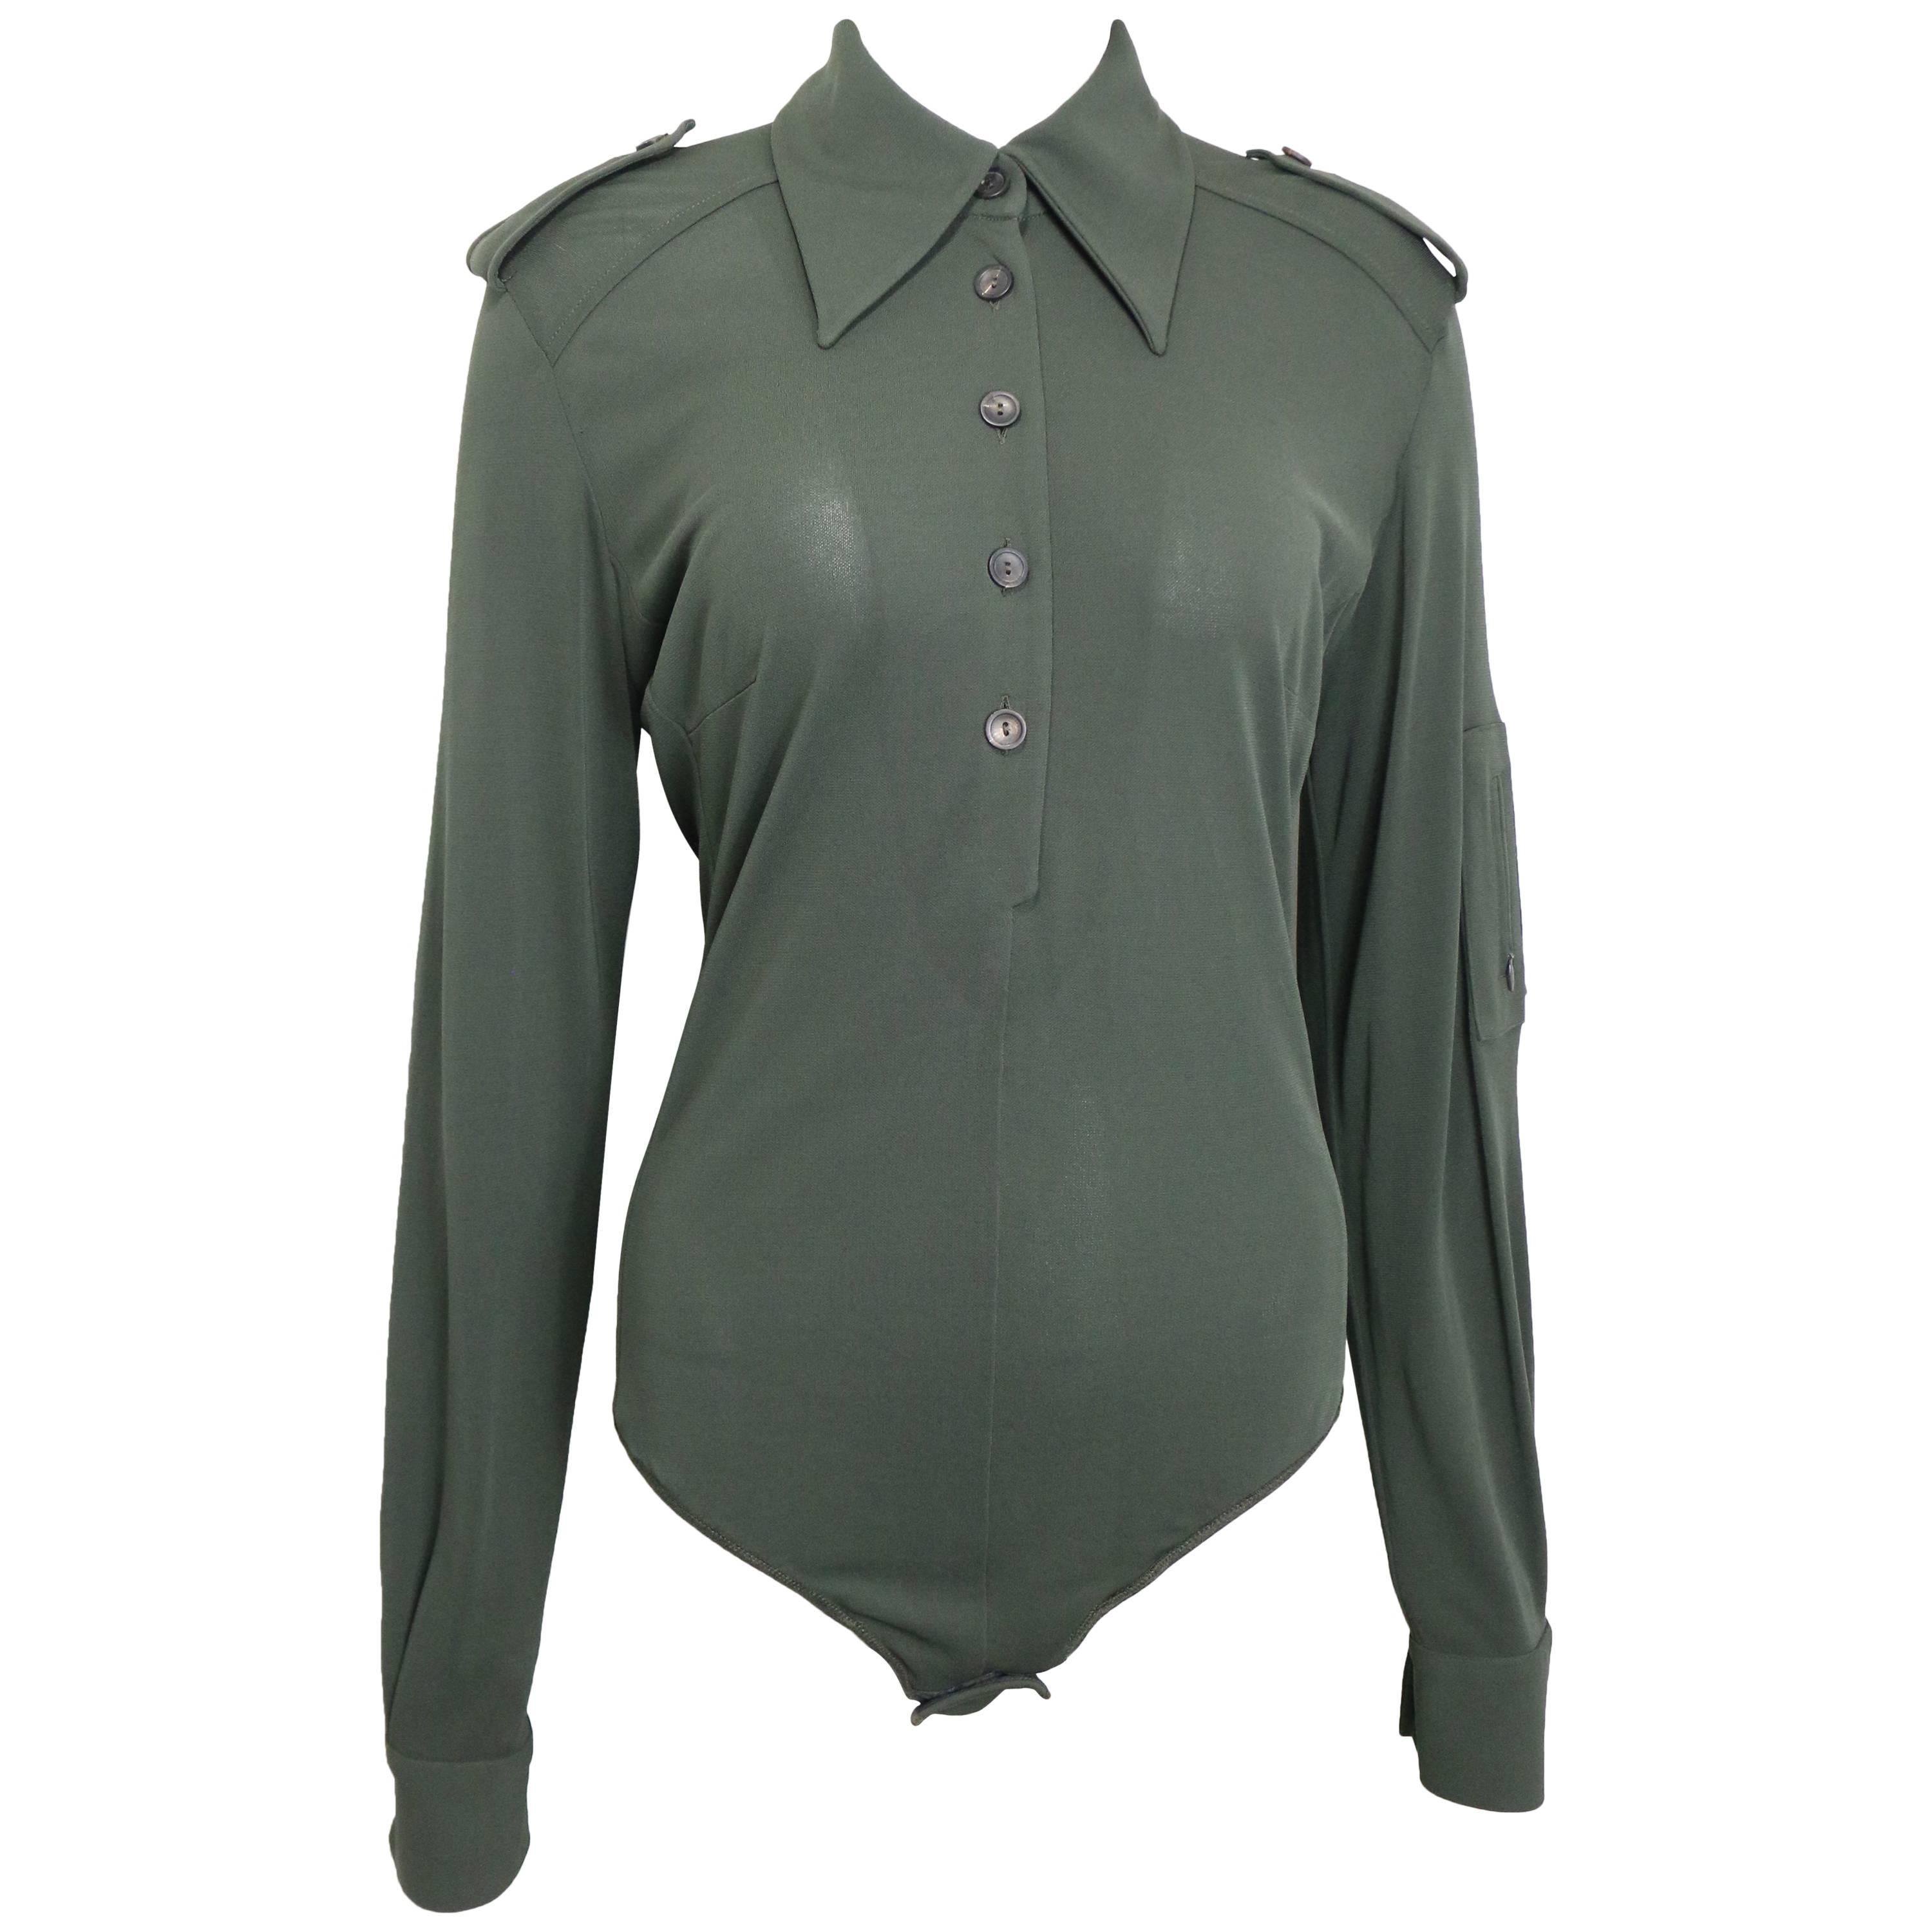 Gucci by Tom Ford Green Bodysuit Long Sleeves Shirt 